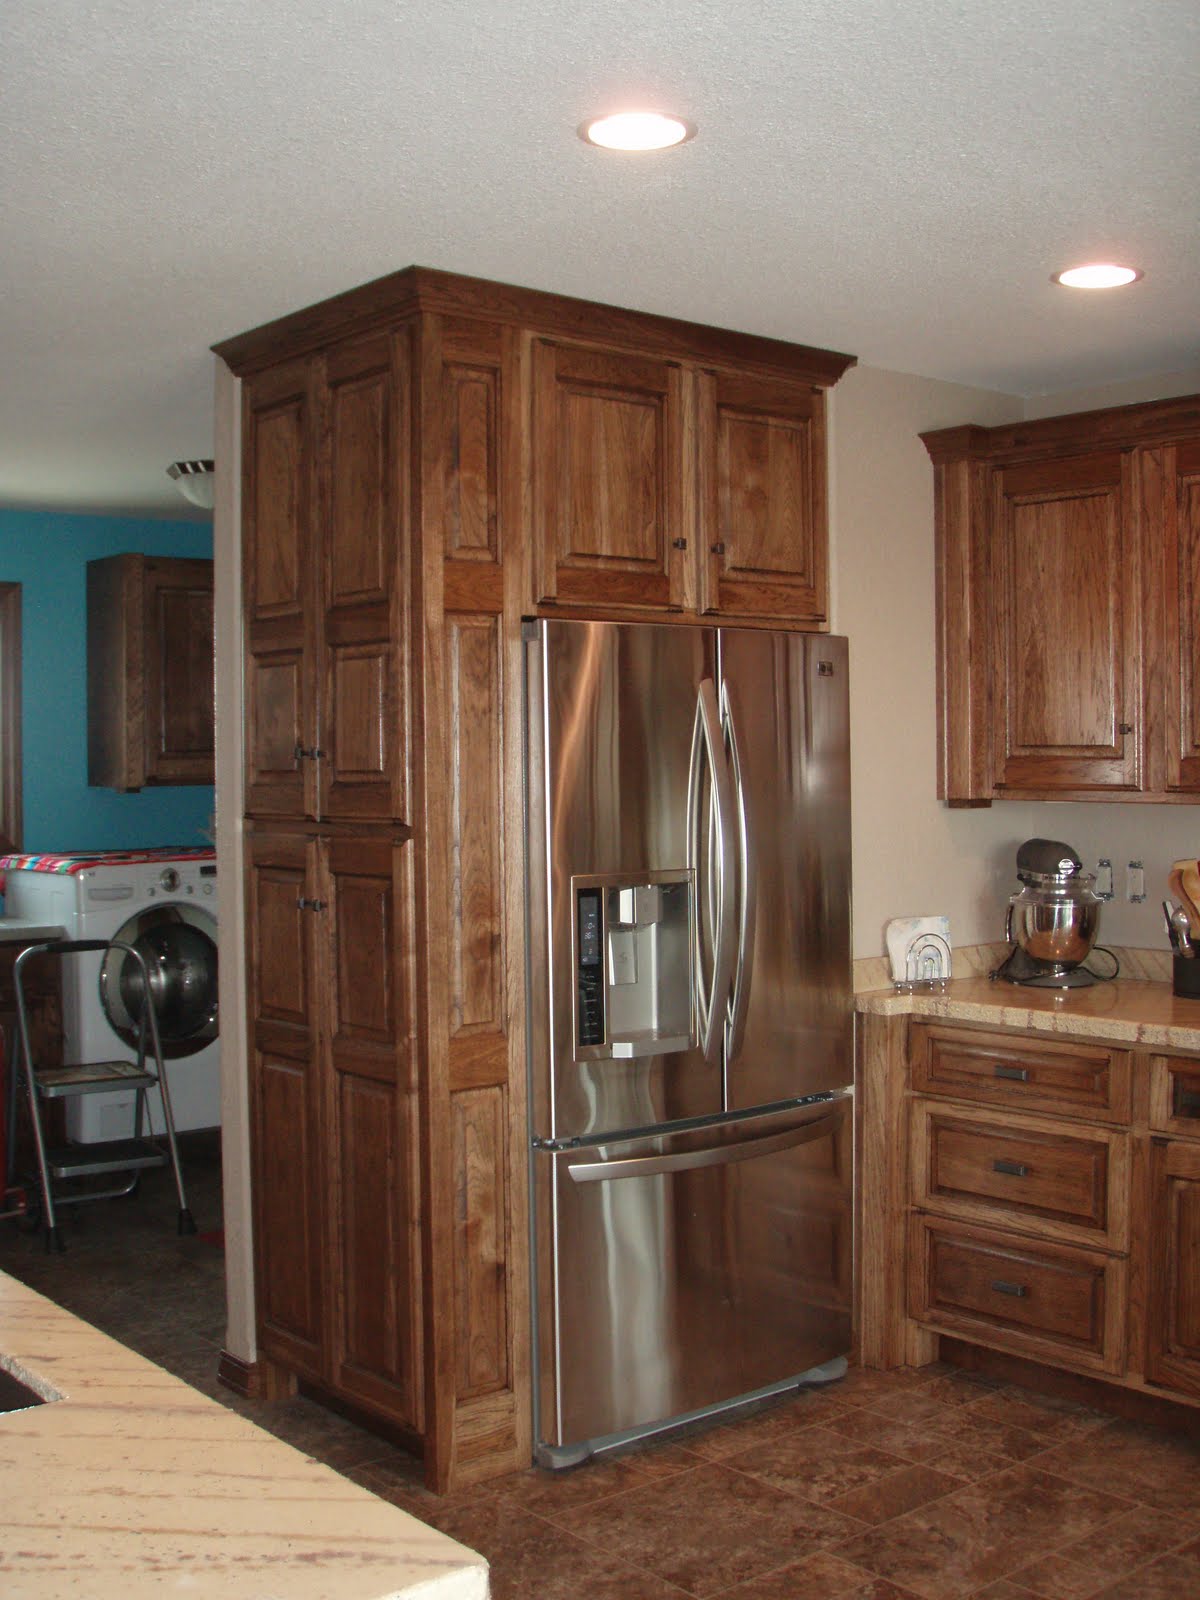 BACKER'S WOODWORKING: Hickory Cabinets with Granicrete 